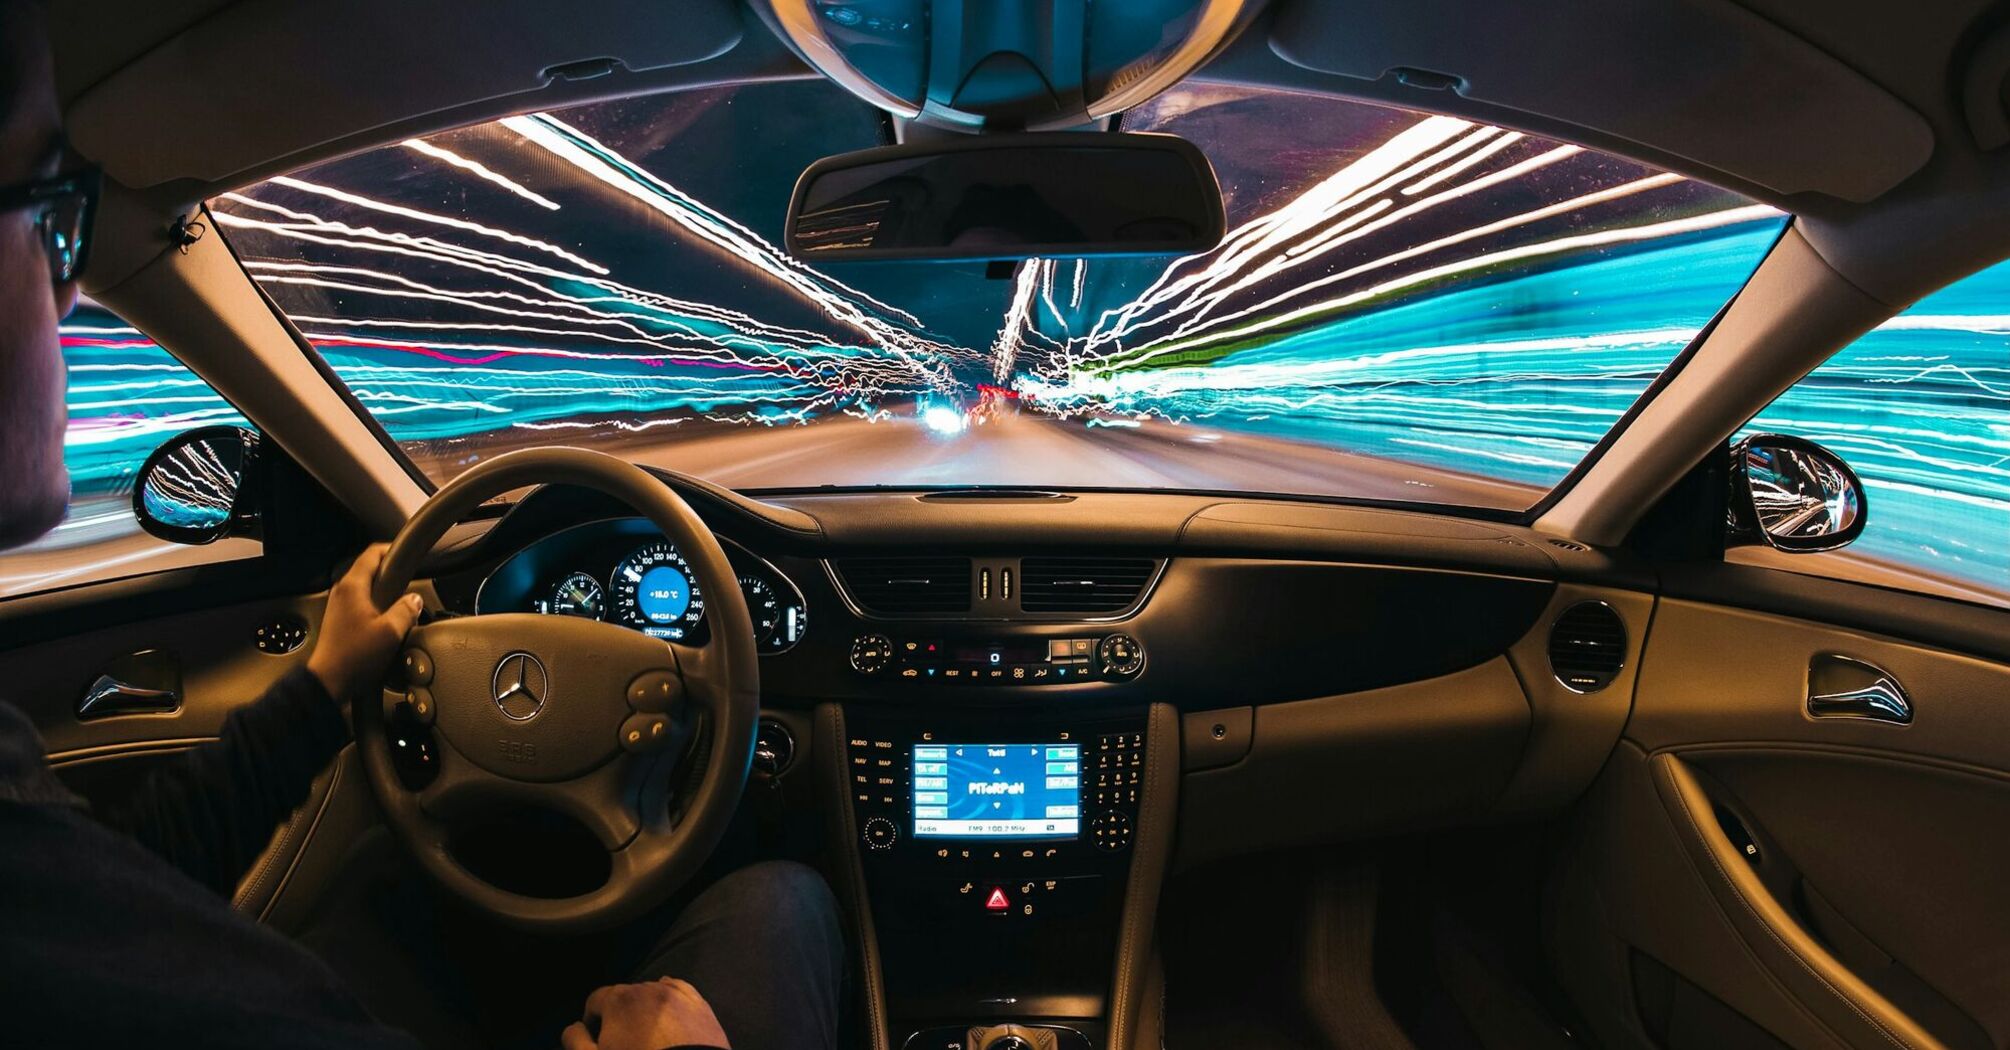 A driver at the wheel of a car with streaks of light representing speed and technology